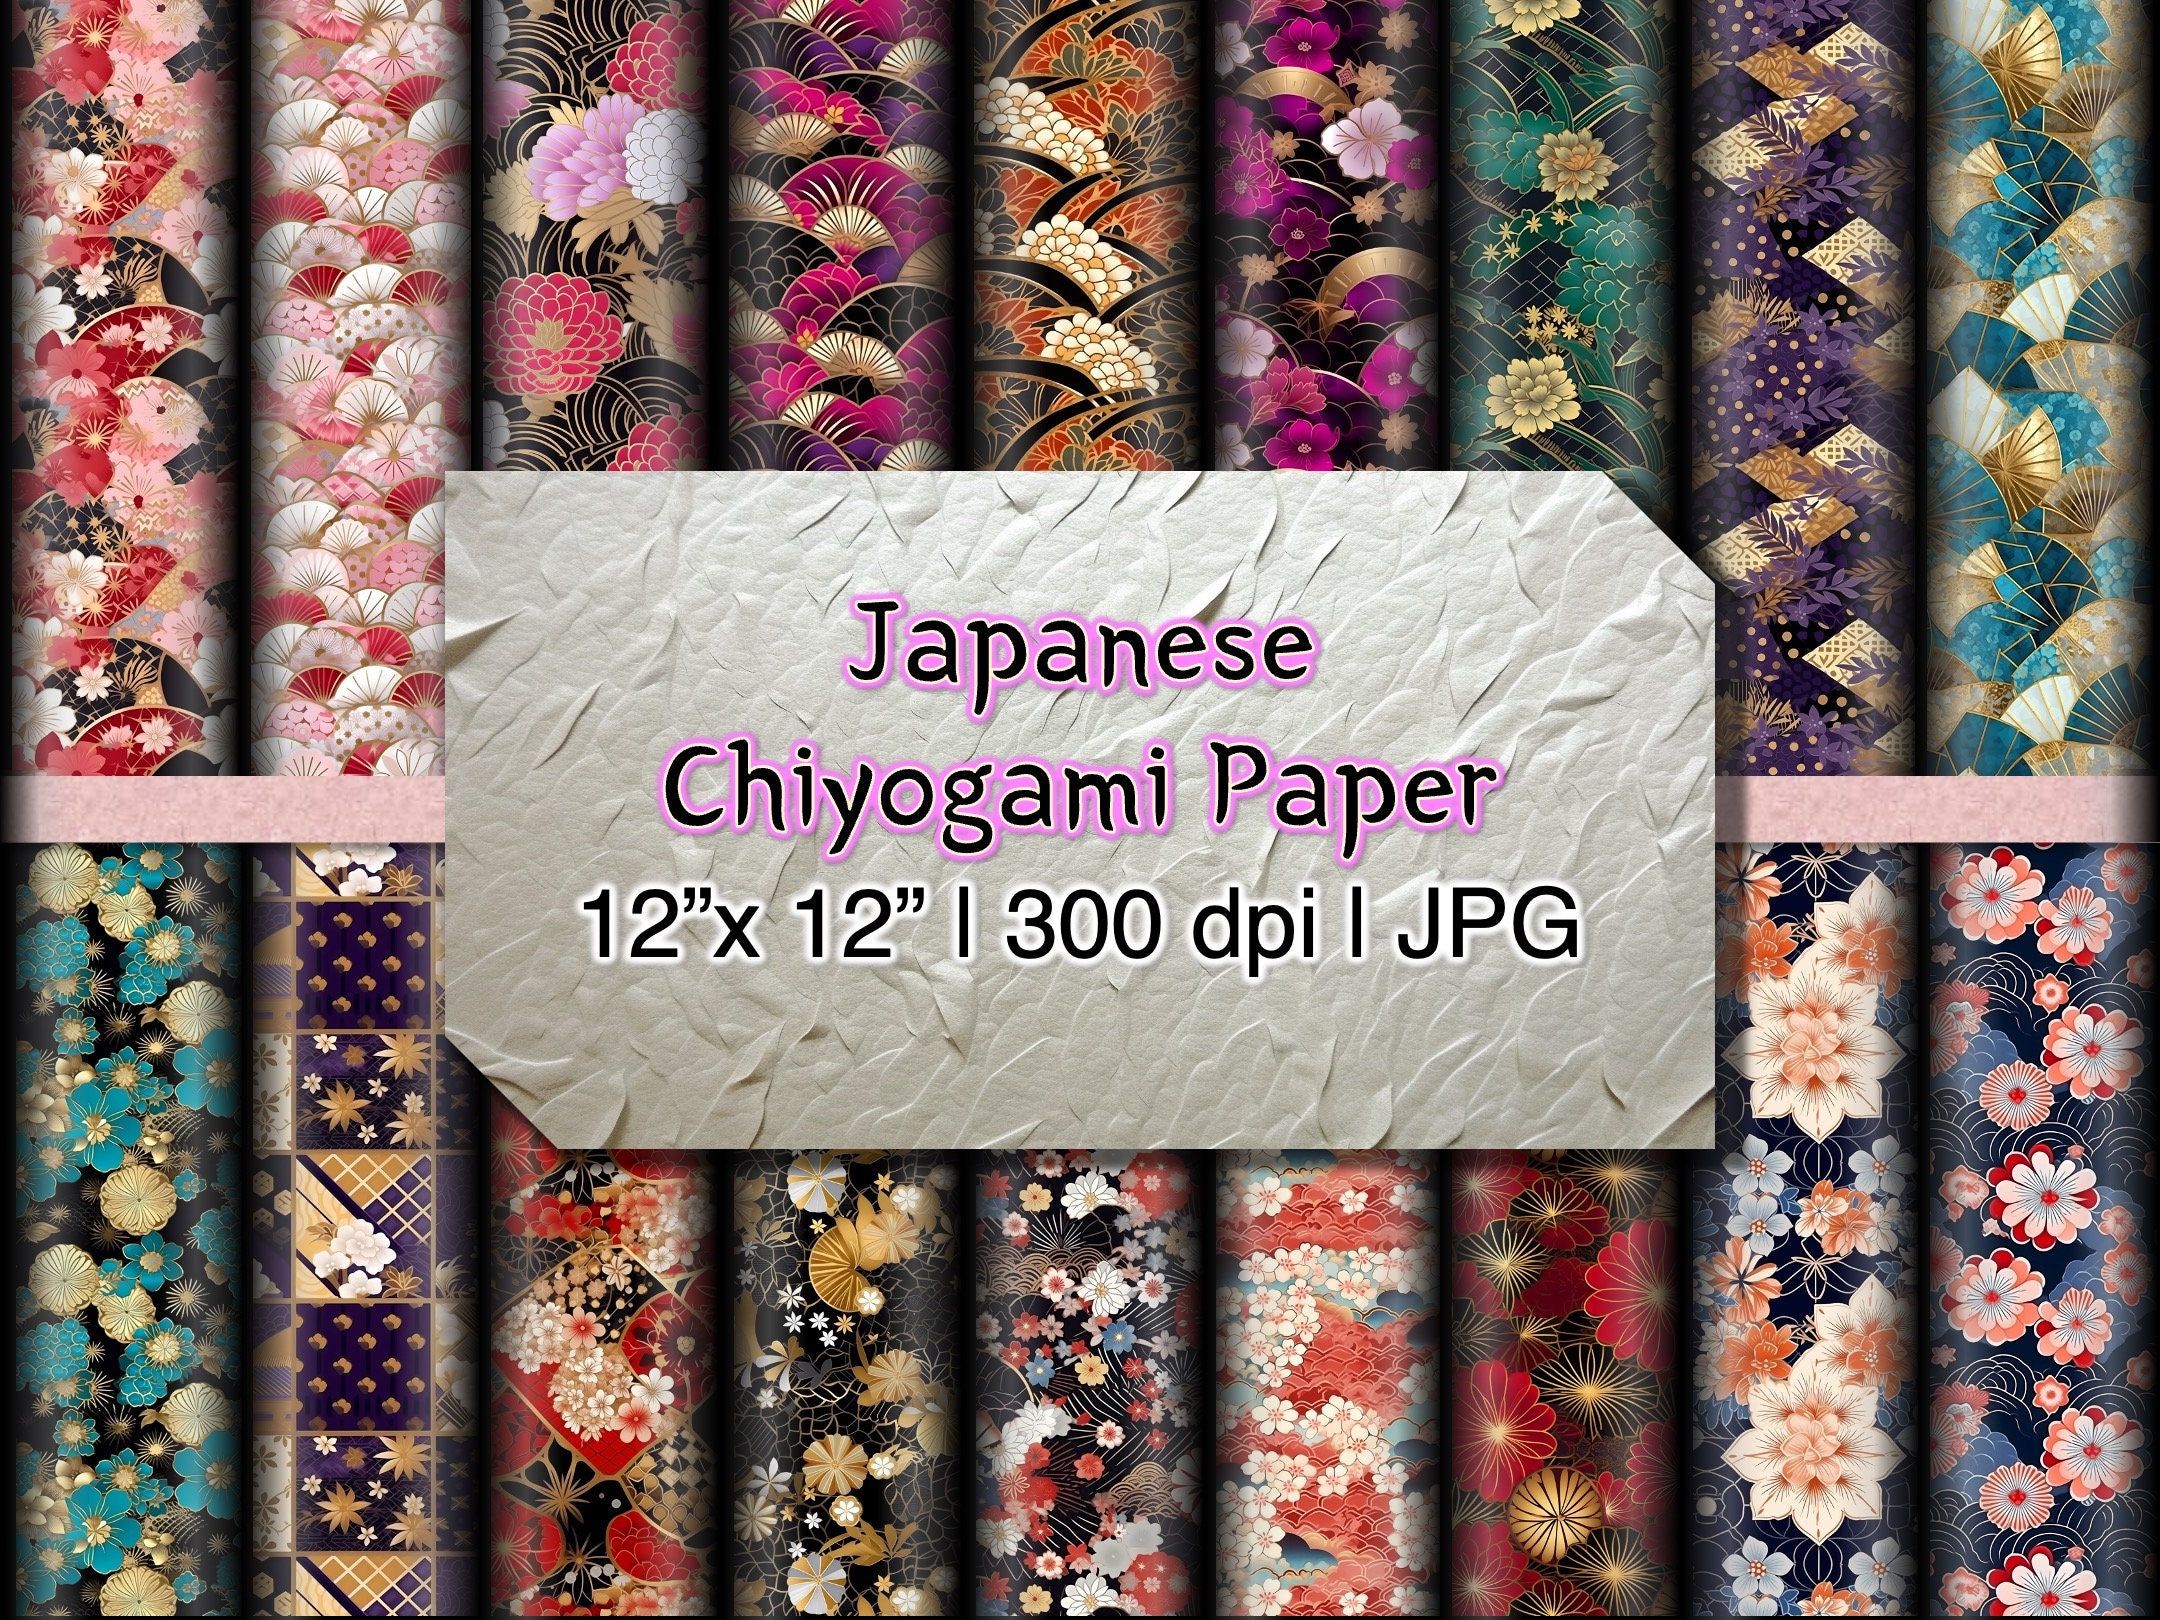 Origami Paper 100 sheets Japanese Chiyogami 8 1/4 (21 cm) (9780804855136)